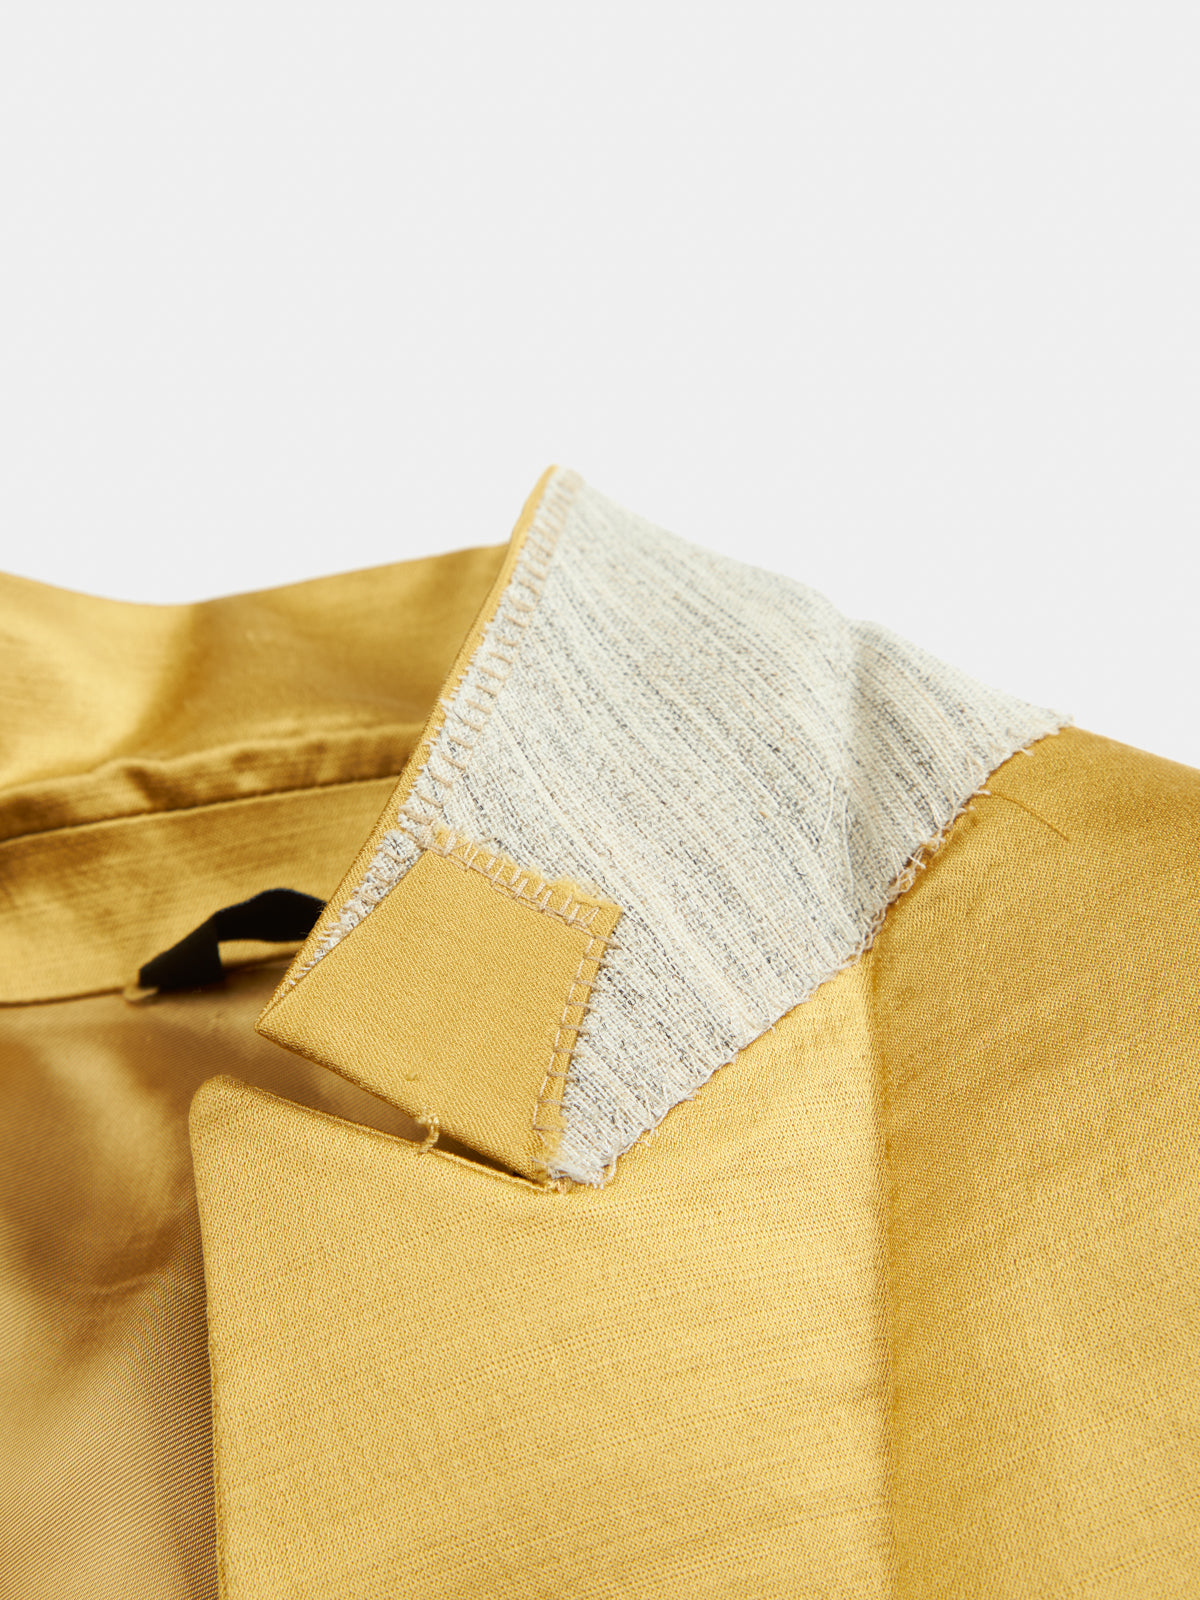 Double-breasted jacket in honey-colored cotton satin